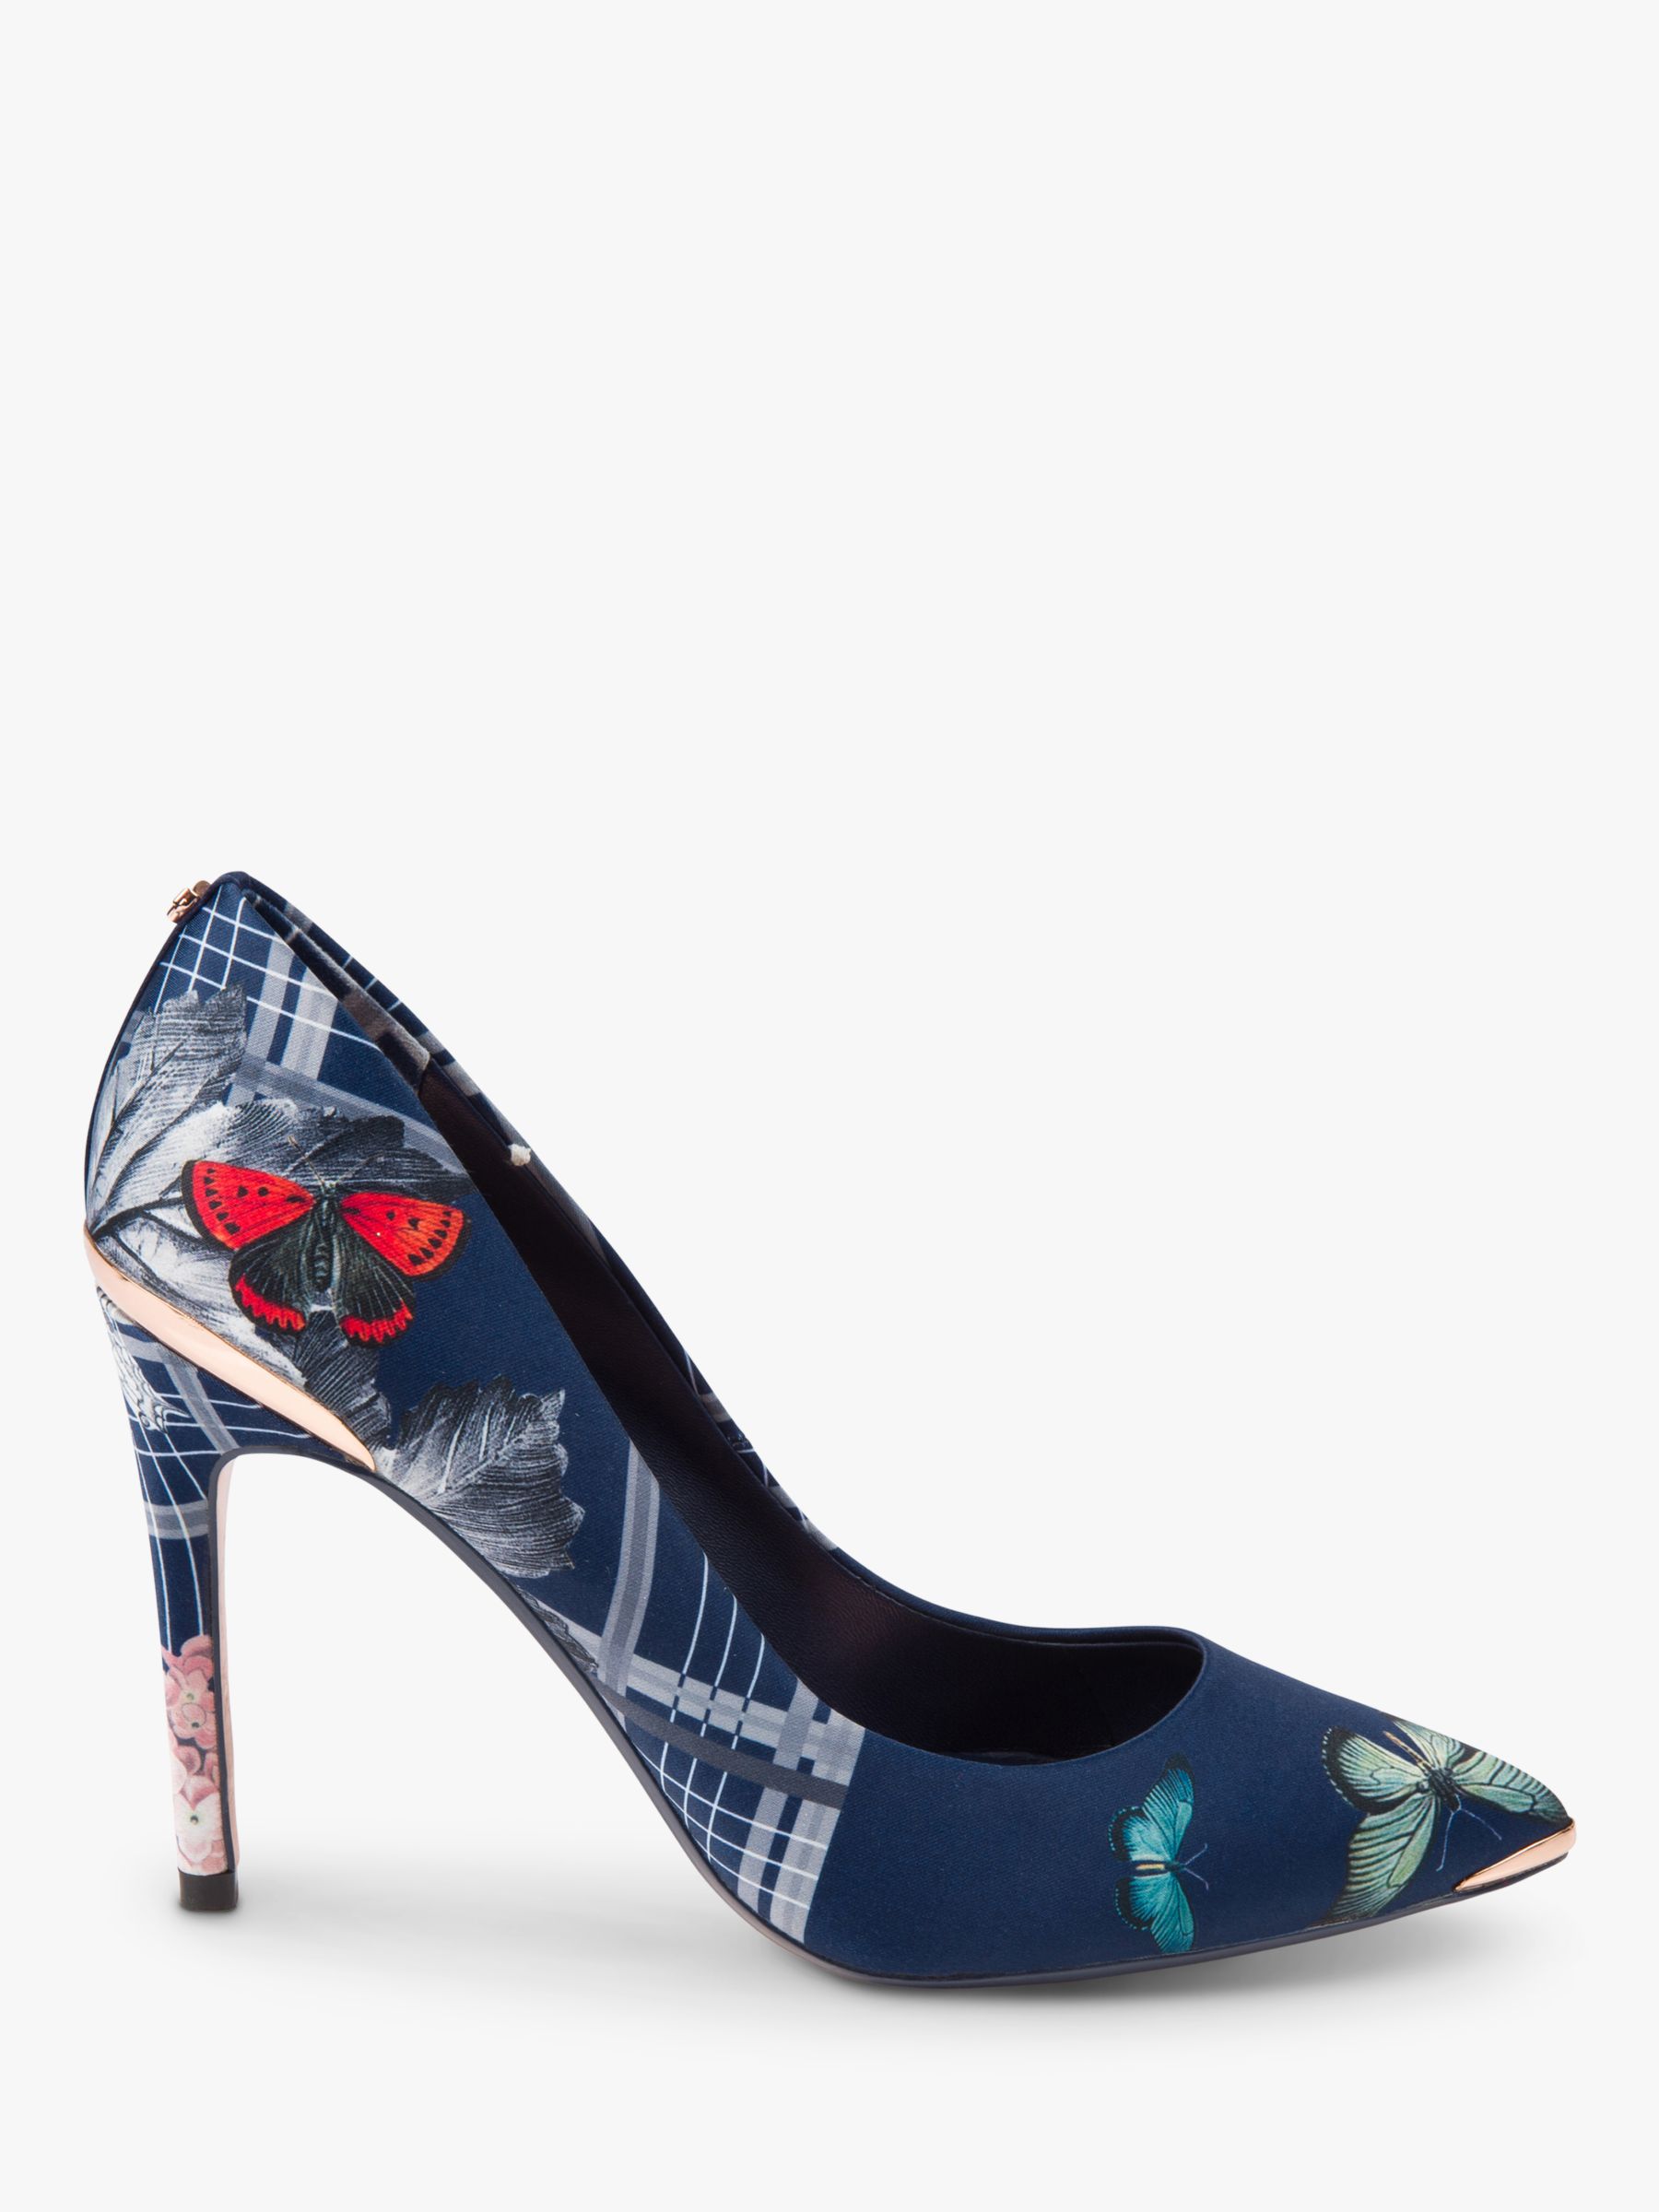 Ted Baker Kawaap Textile Heeled Court Shoes, Blue Multi